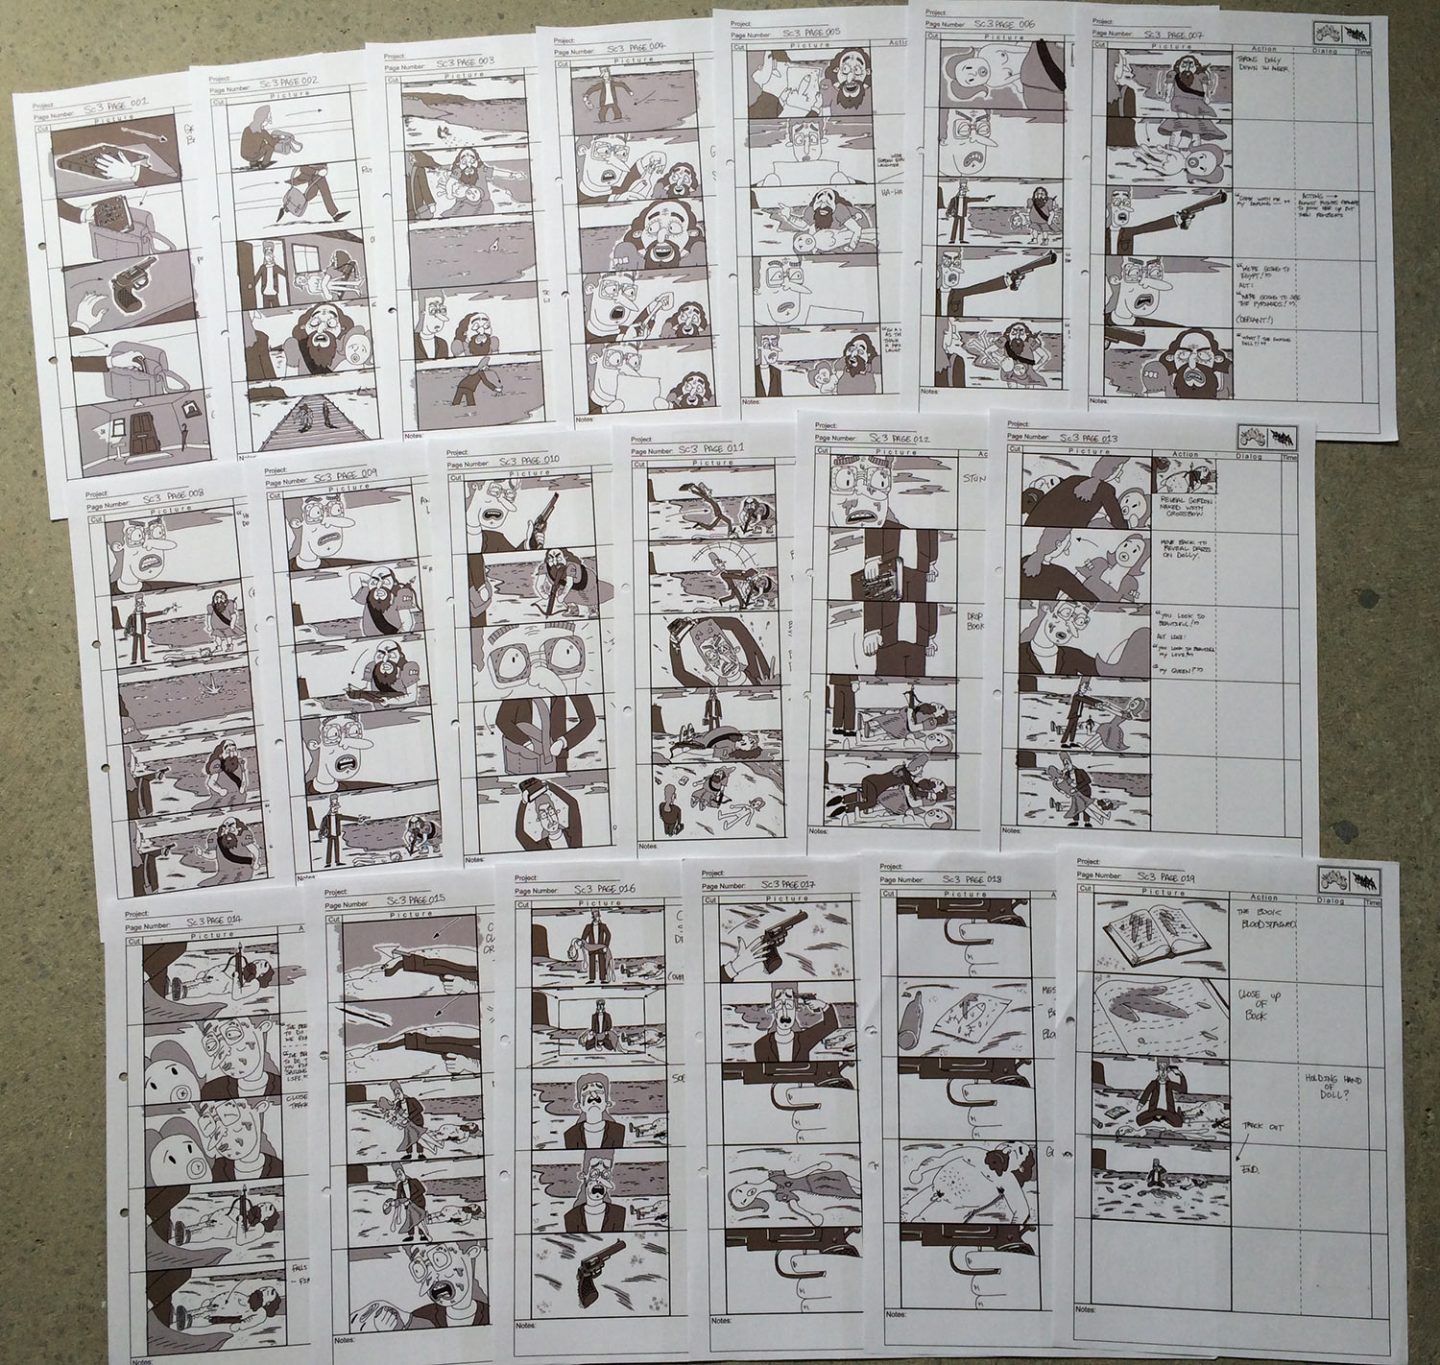 More refined storyboards for "After the End" were drawn digitally in Photoshop.